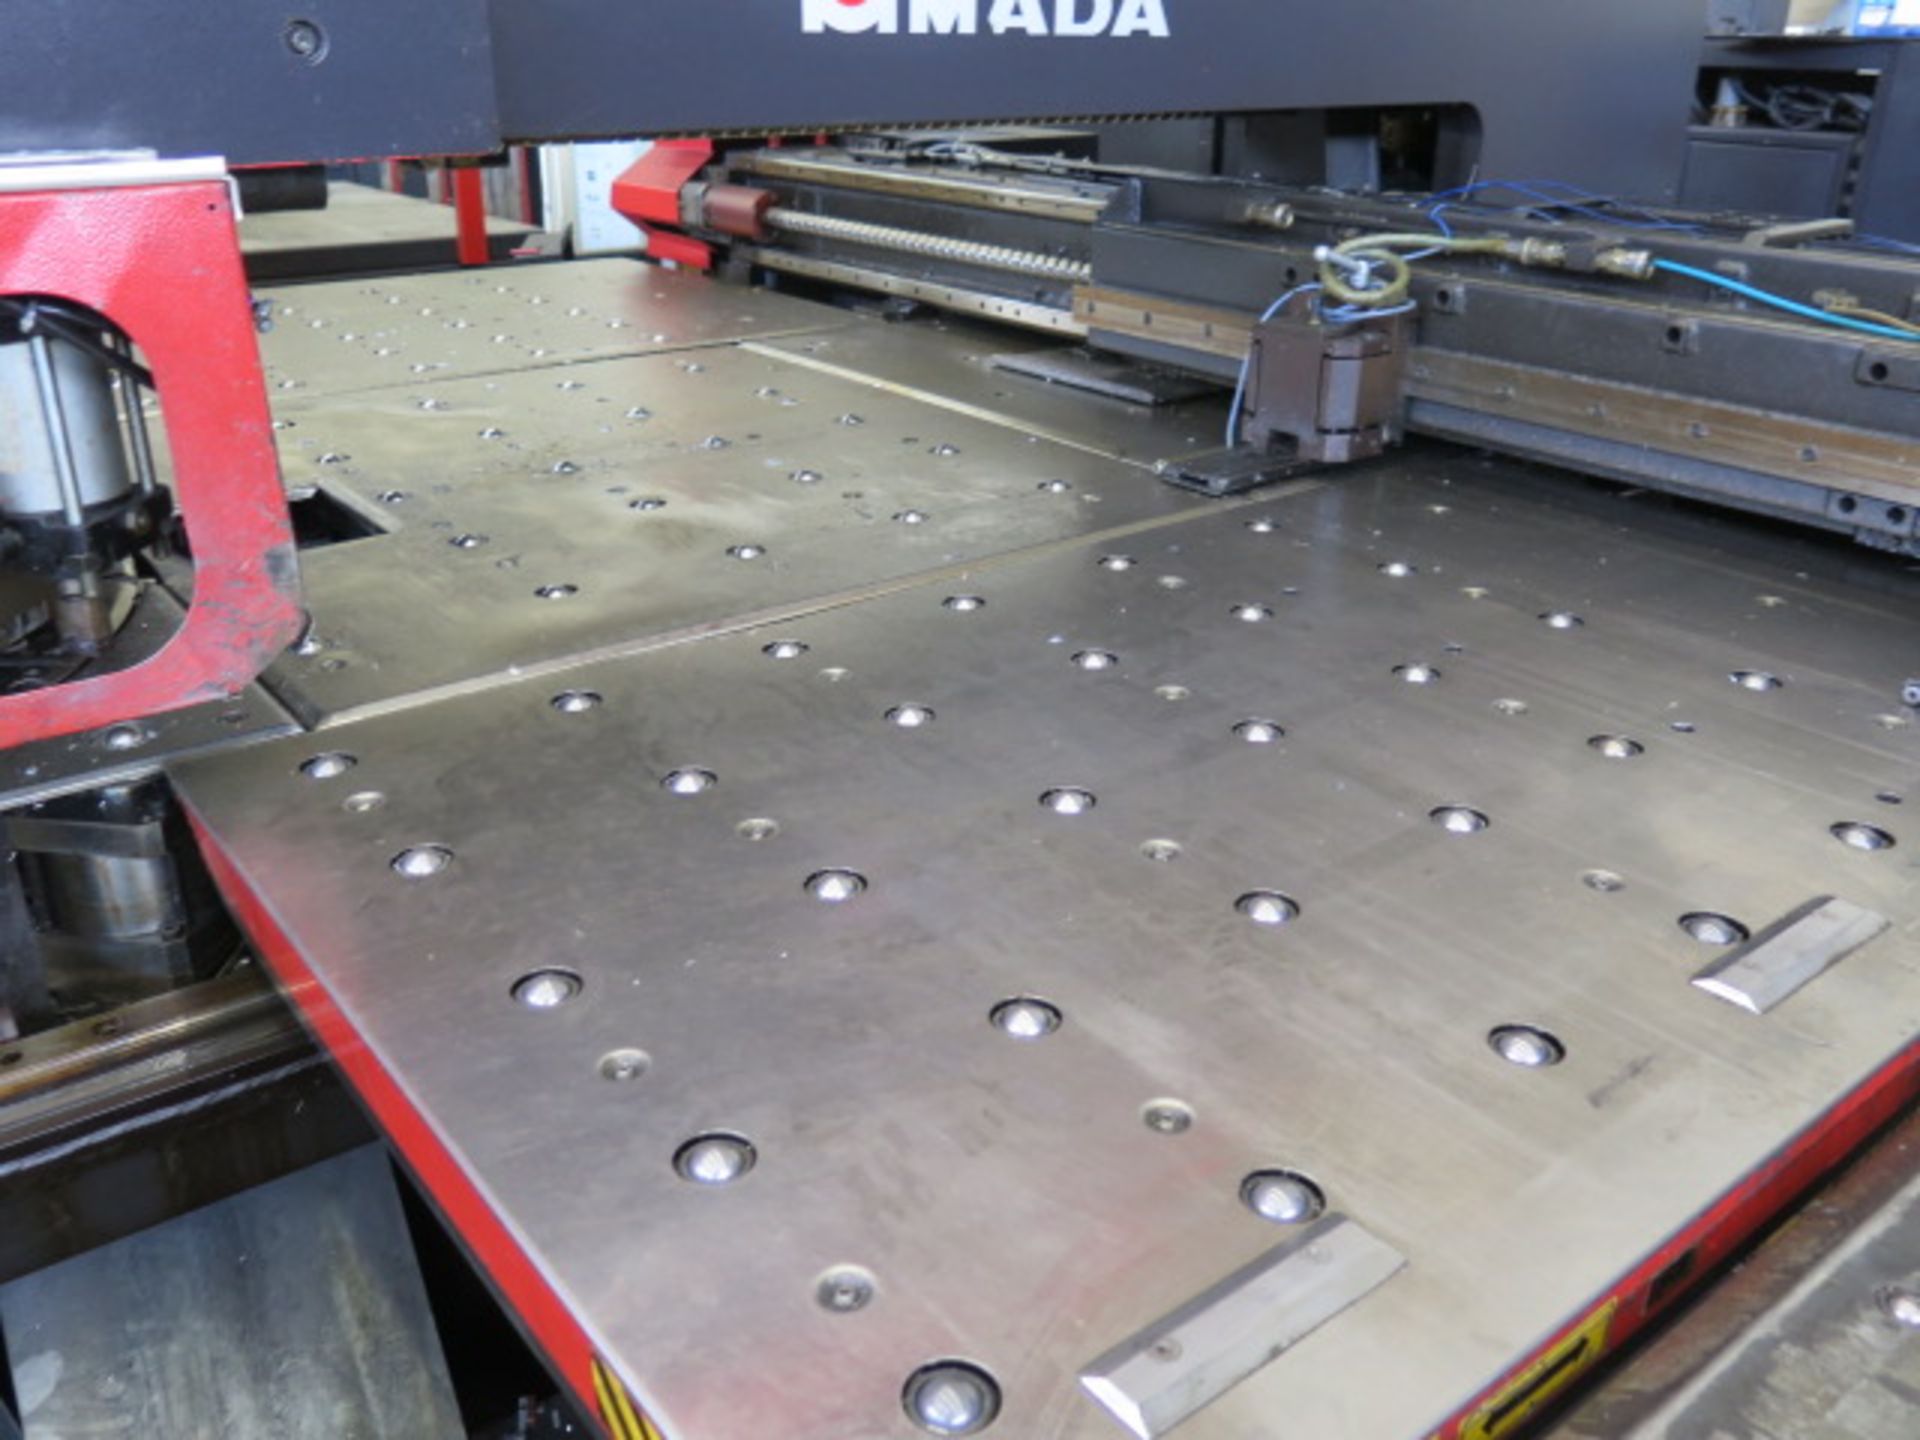 Amada VIPROS 345 30-Ton CNC Turret Punch Cell s/n 34510153 w/ 04P-C Controls, 58-Station, SOLD AS IS - Image 3 of 28